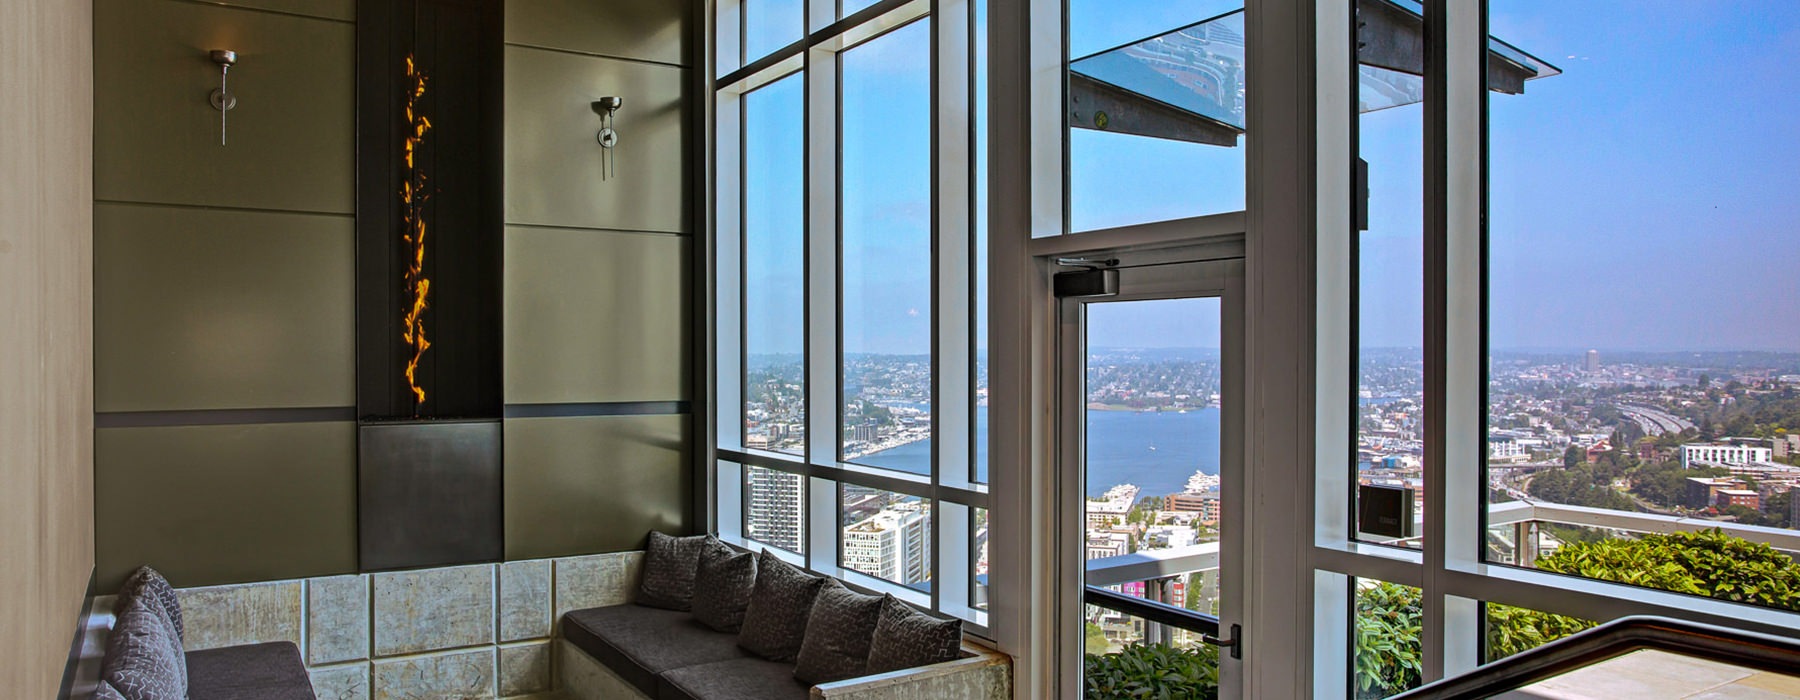 Fireplace nook with view from 41st floor